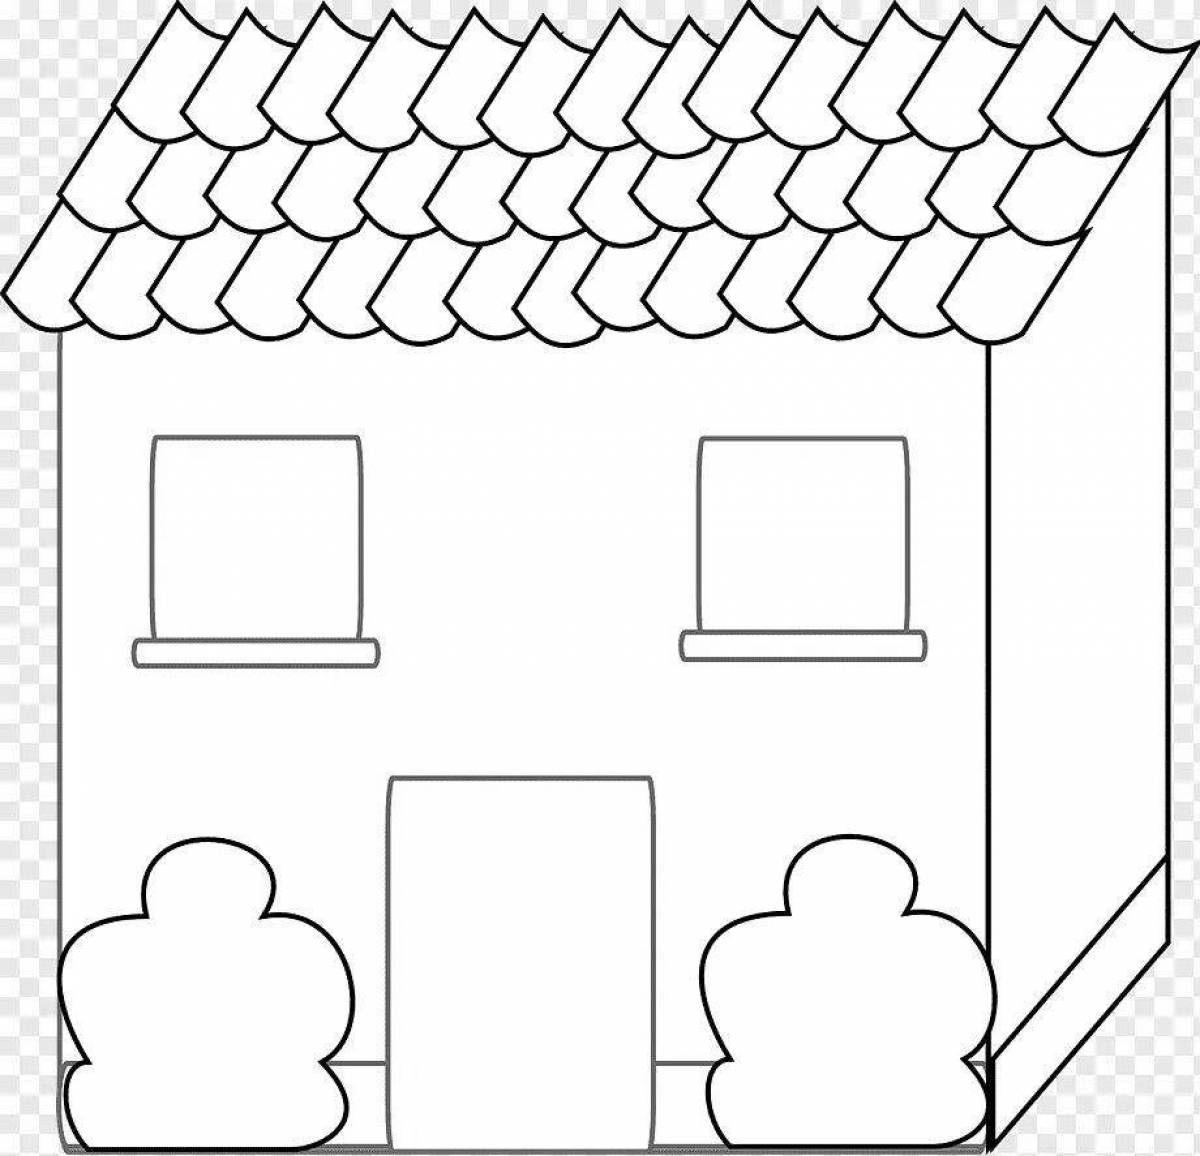 Colourful paper house coloring book